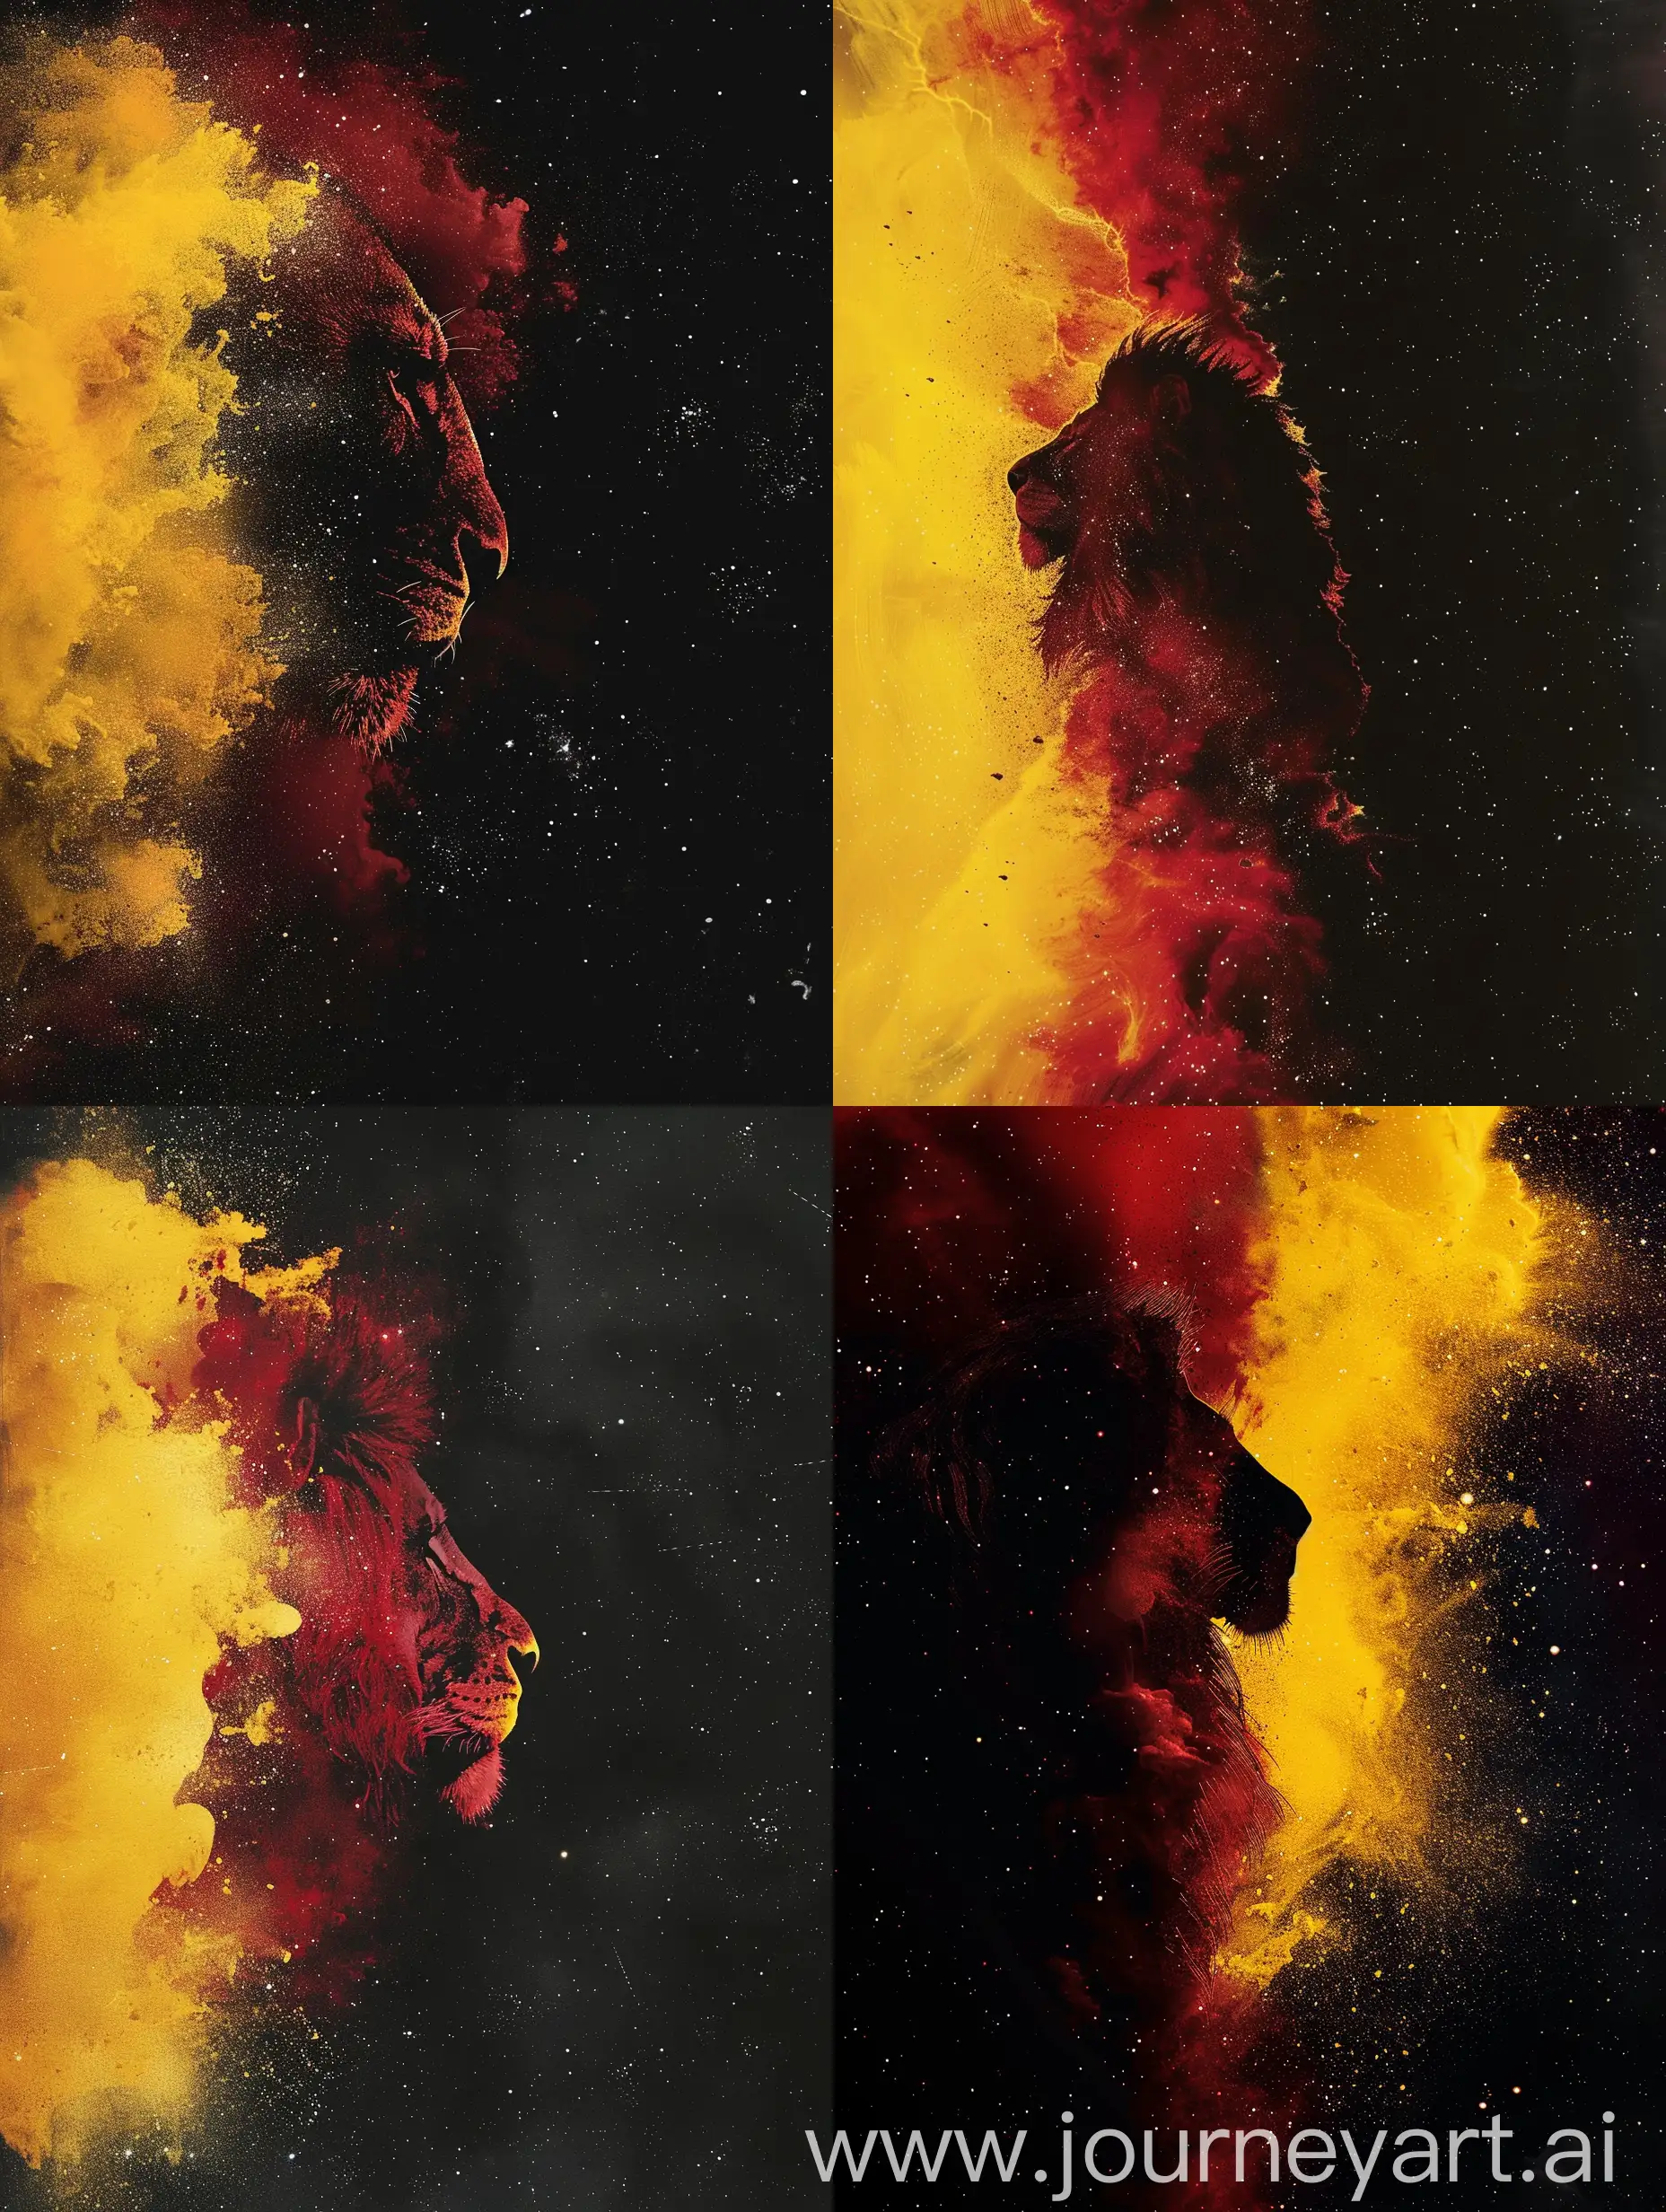 Yellow Red space image, one side yellow and one side red, space dust clouds and stars, realistic Nasa space photo, Lion silhouette in the distance, lion silhouette view from space dust Yellow Red Orange Burgundy colors, black space background